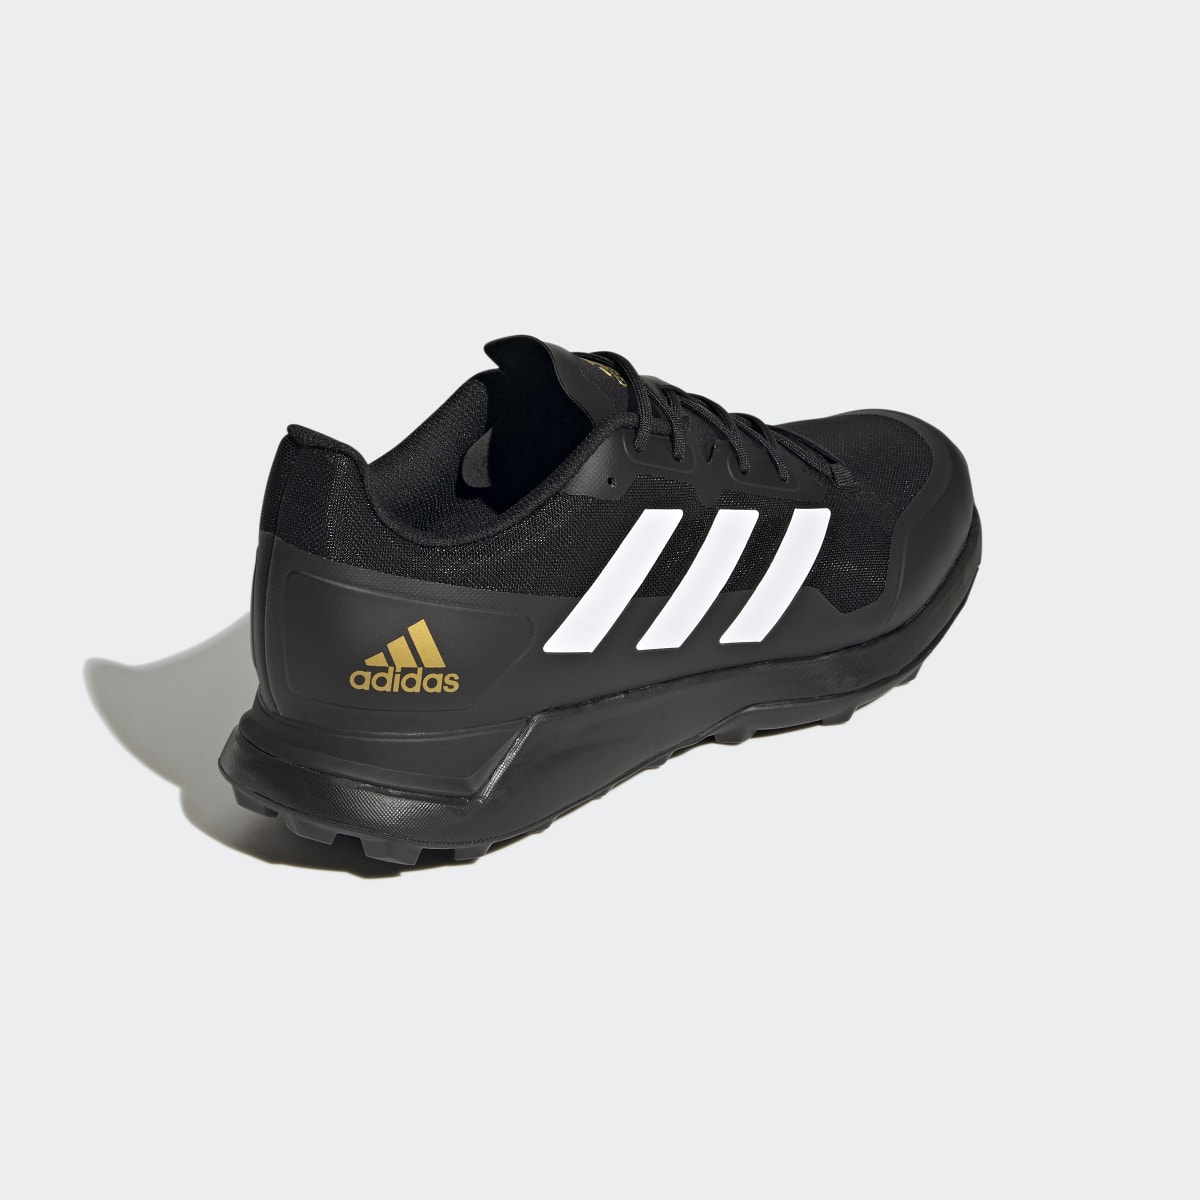 Adidas Zone Dox 2.2 S Boots. 6